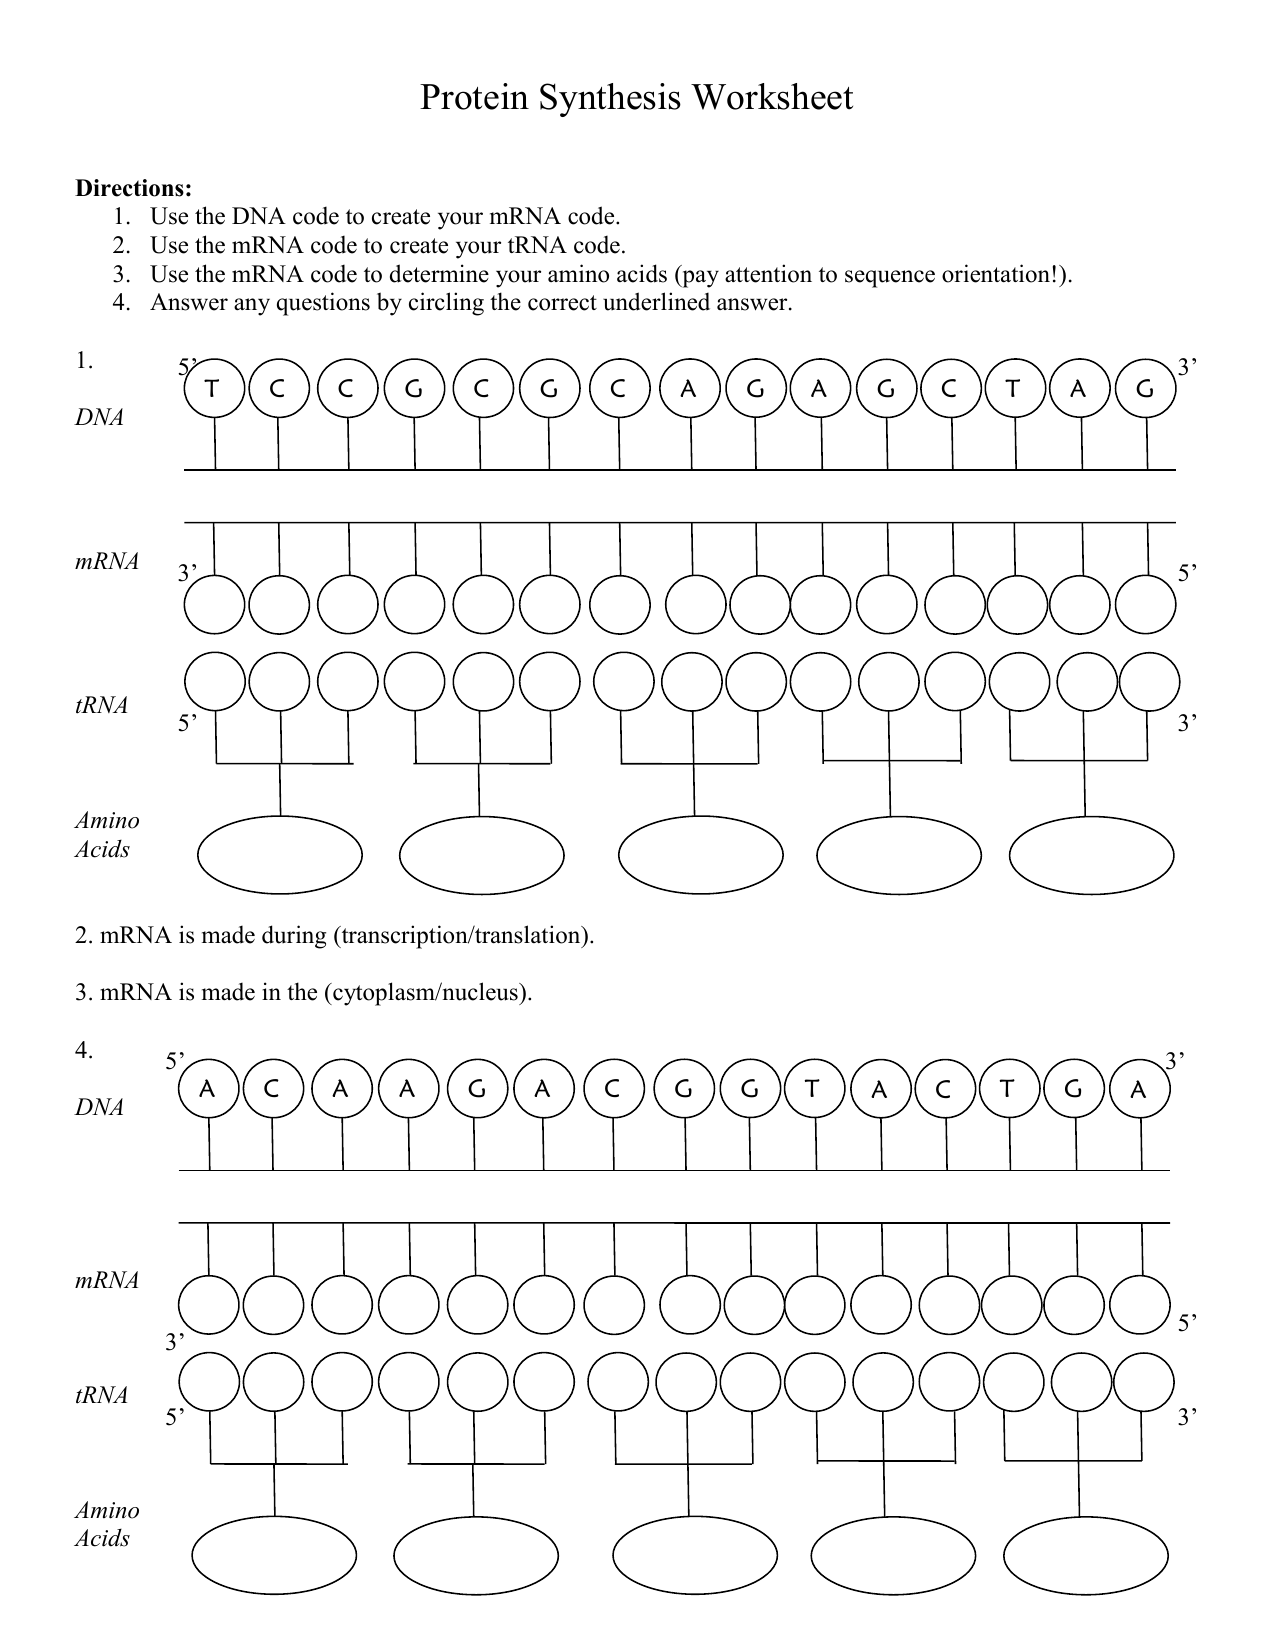 Protein Synthesis Worksheet With Protein Synthesis Worksheet Answer Key